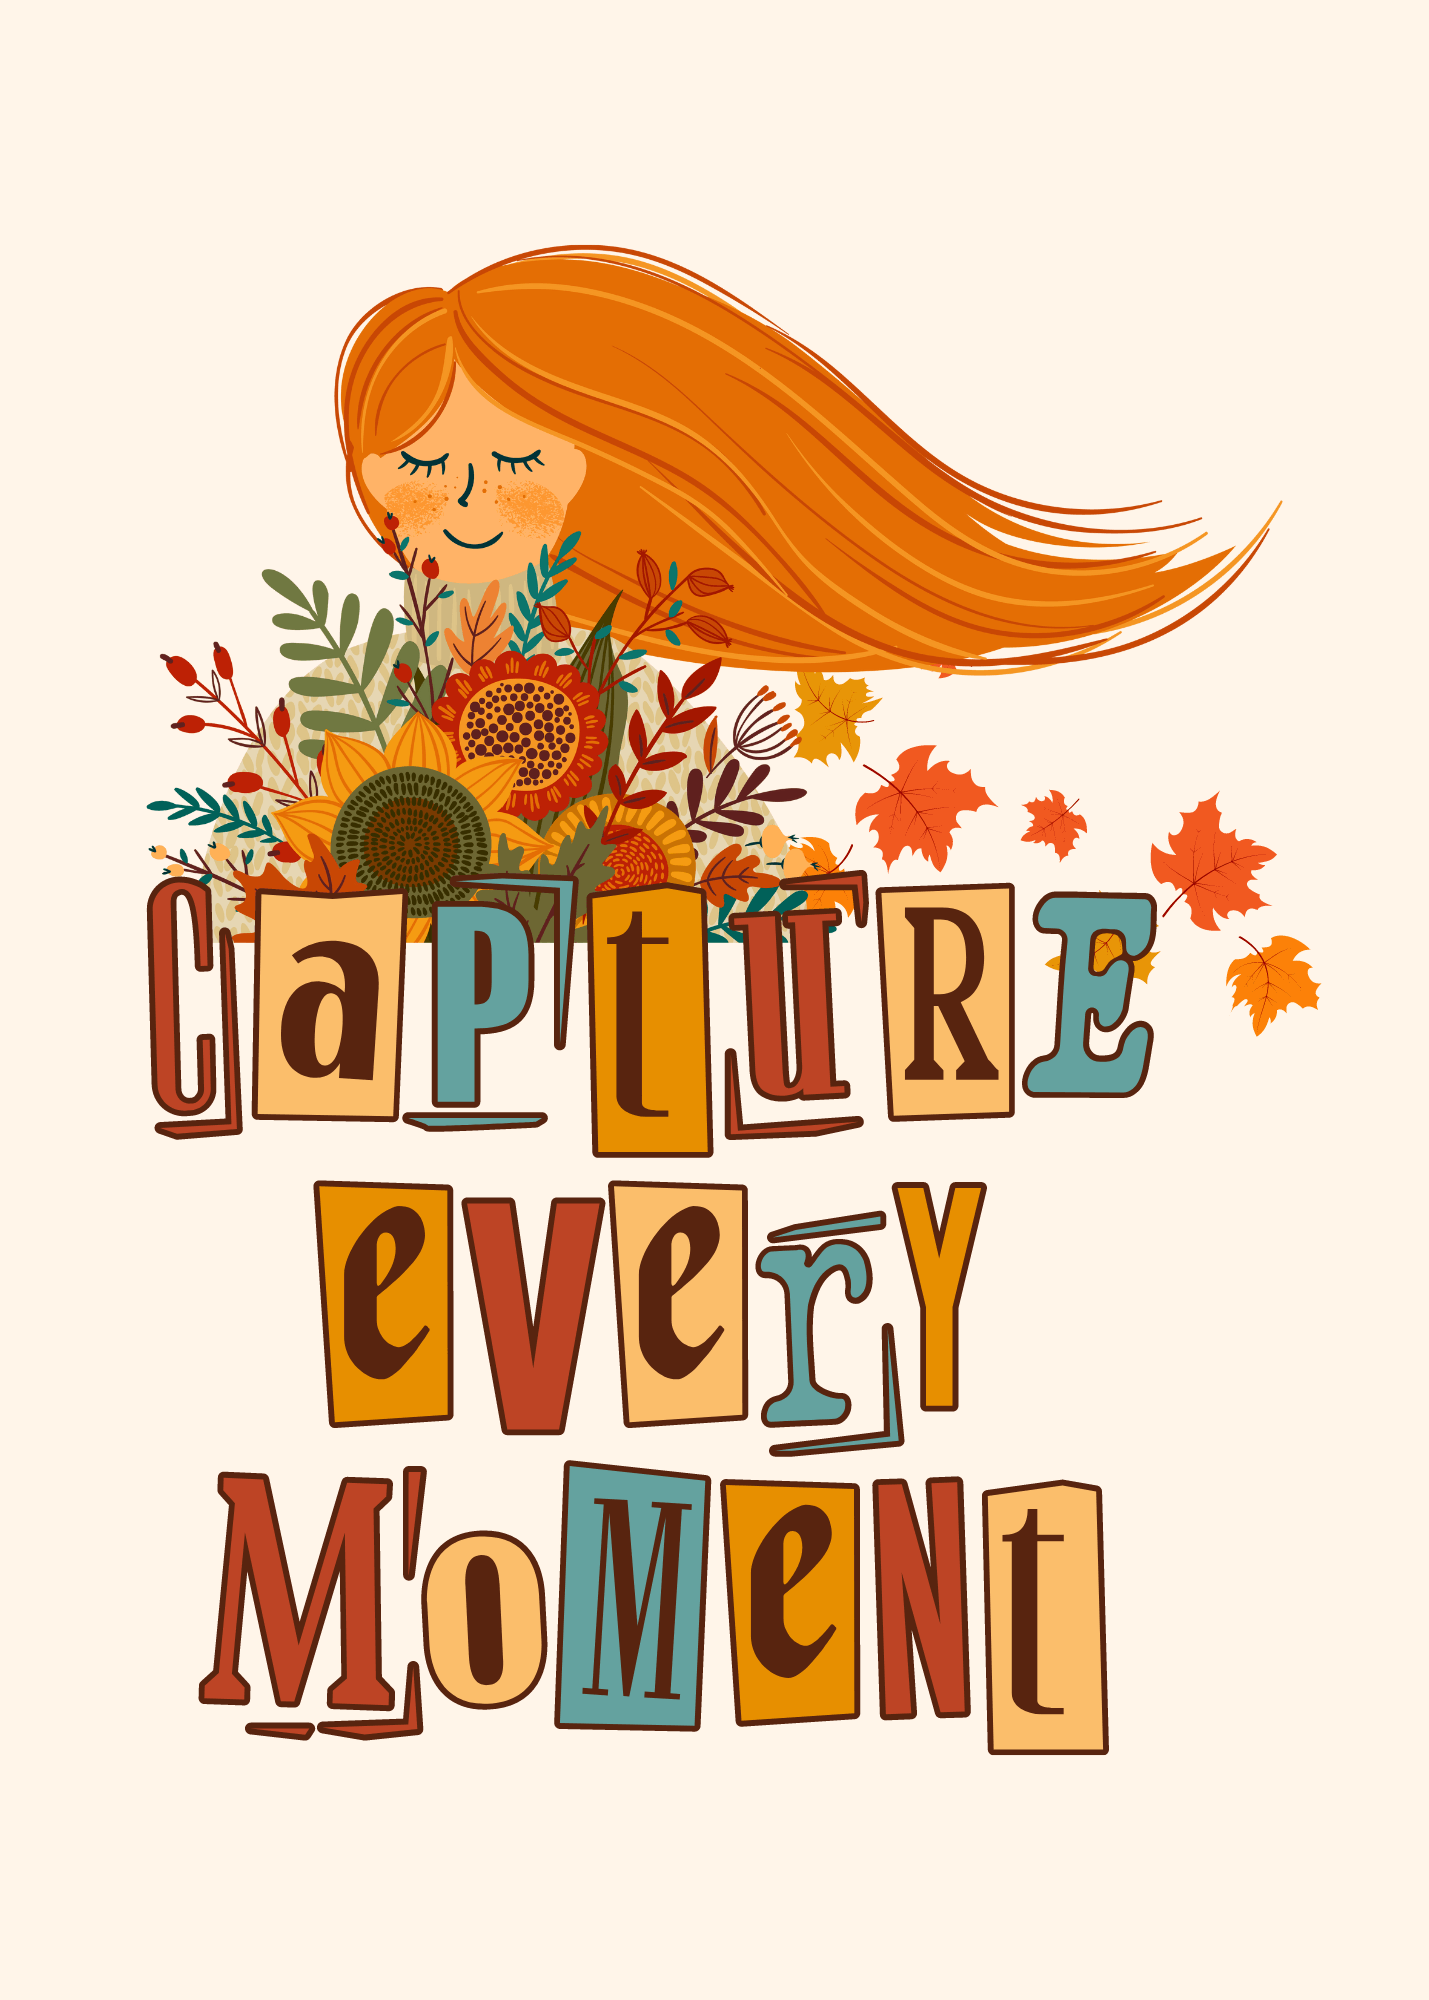 Capture every moment